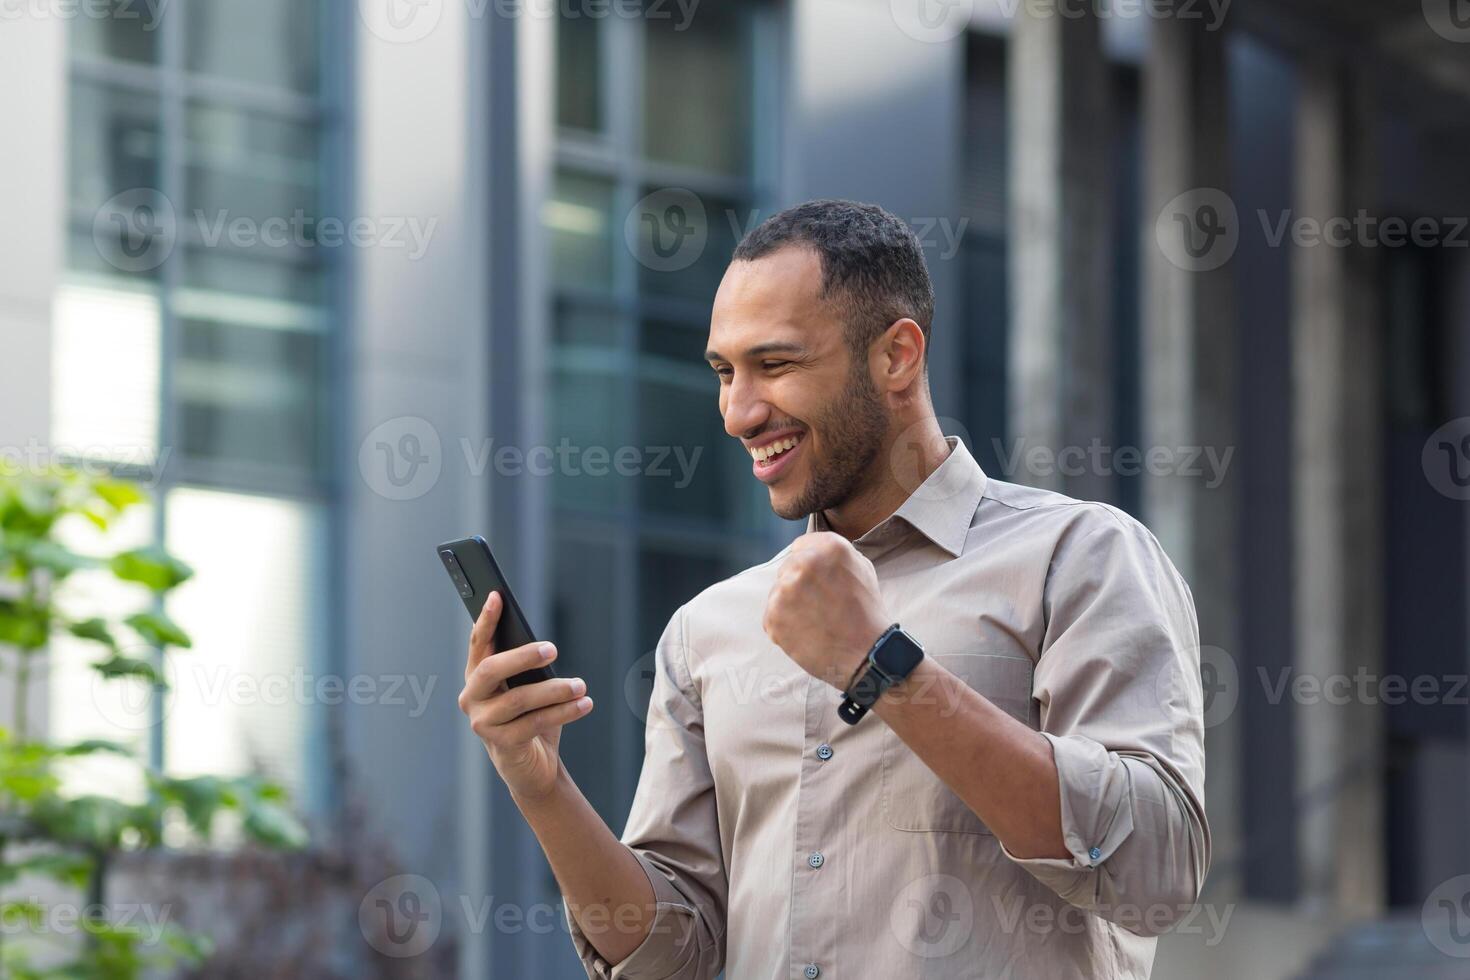 African american businessman outside office building using phone, smiling and happy holding hand up triumph gesture, young entrepreneur celebrating victory reading good investment news online photo